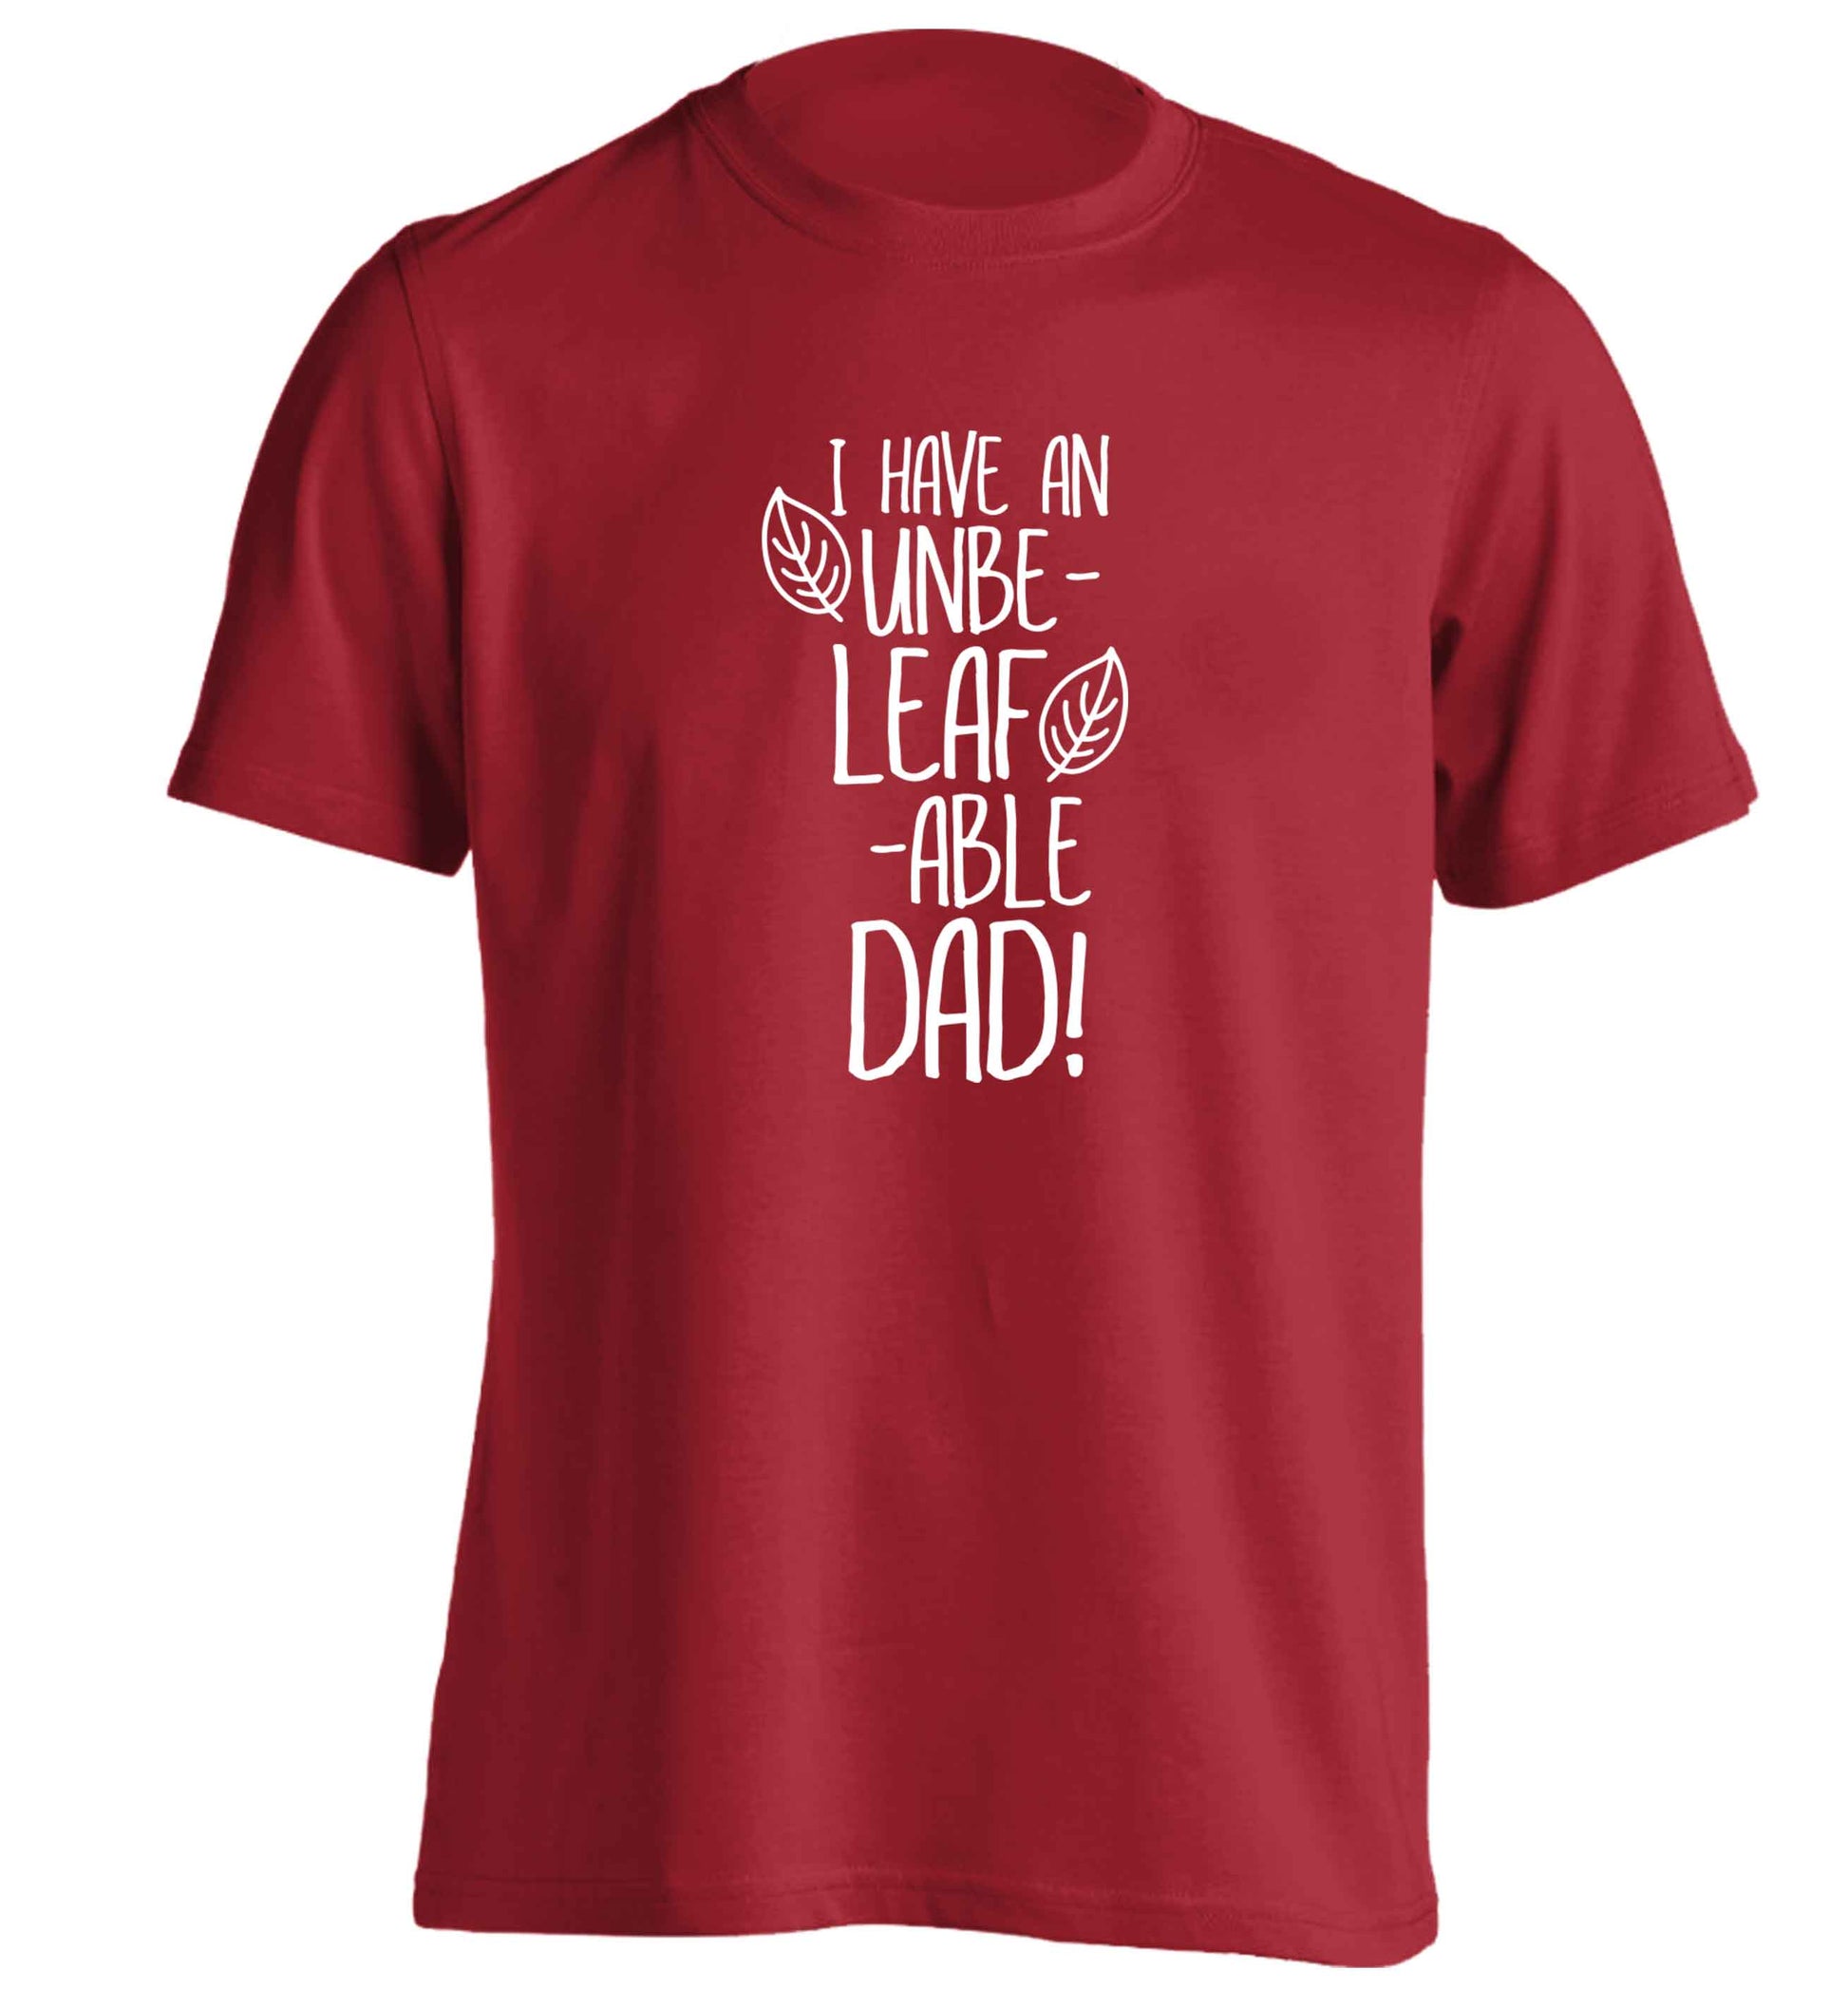 I have an unbe-leaf-able dad adults unisex red Tshirt 2XL